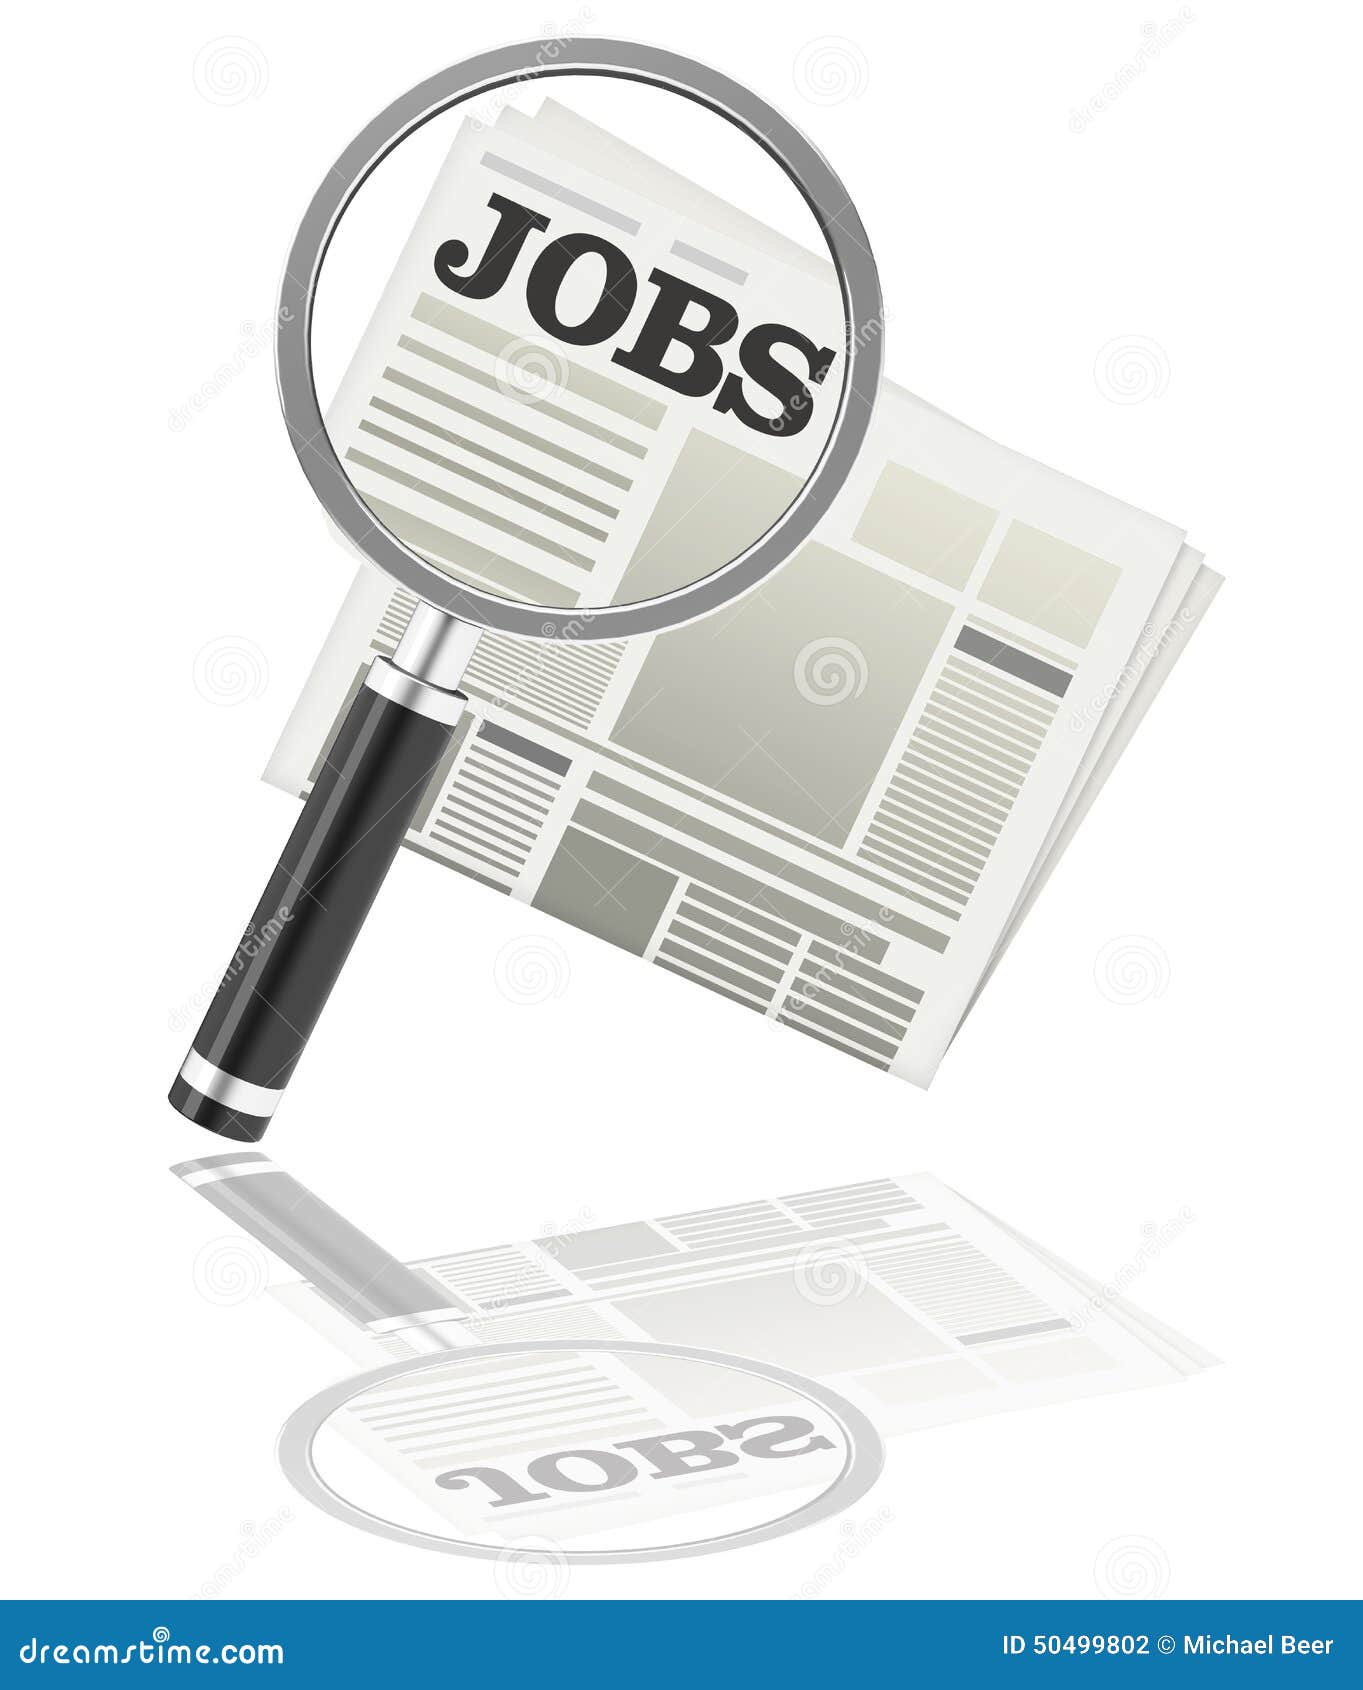 Special Assistant to CEO (Personal Assistant) Job RECRUITPEDIA PTE. LTD. Singapore